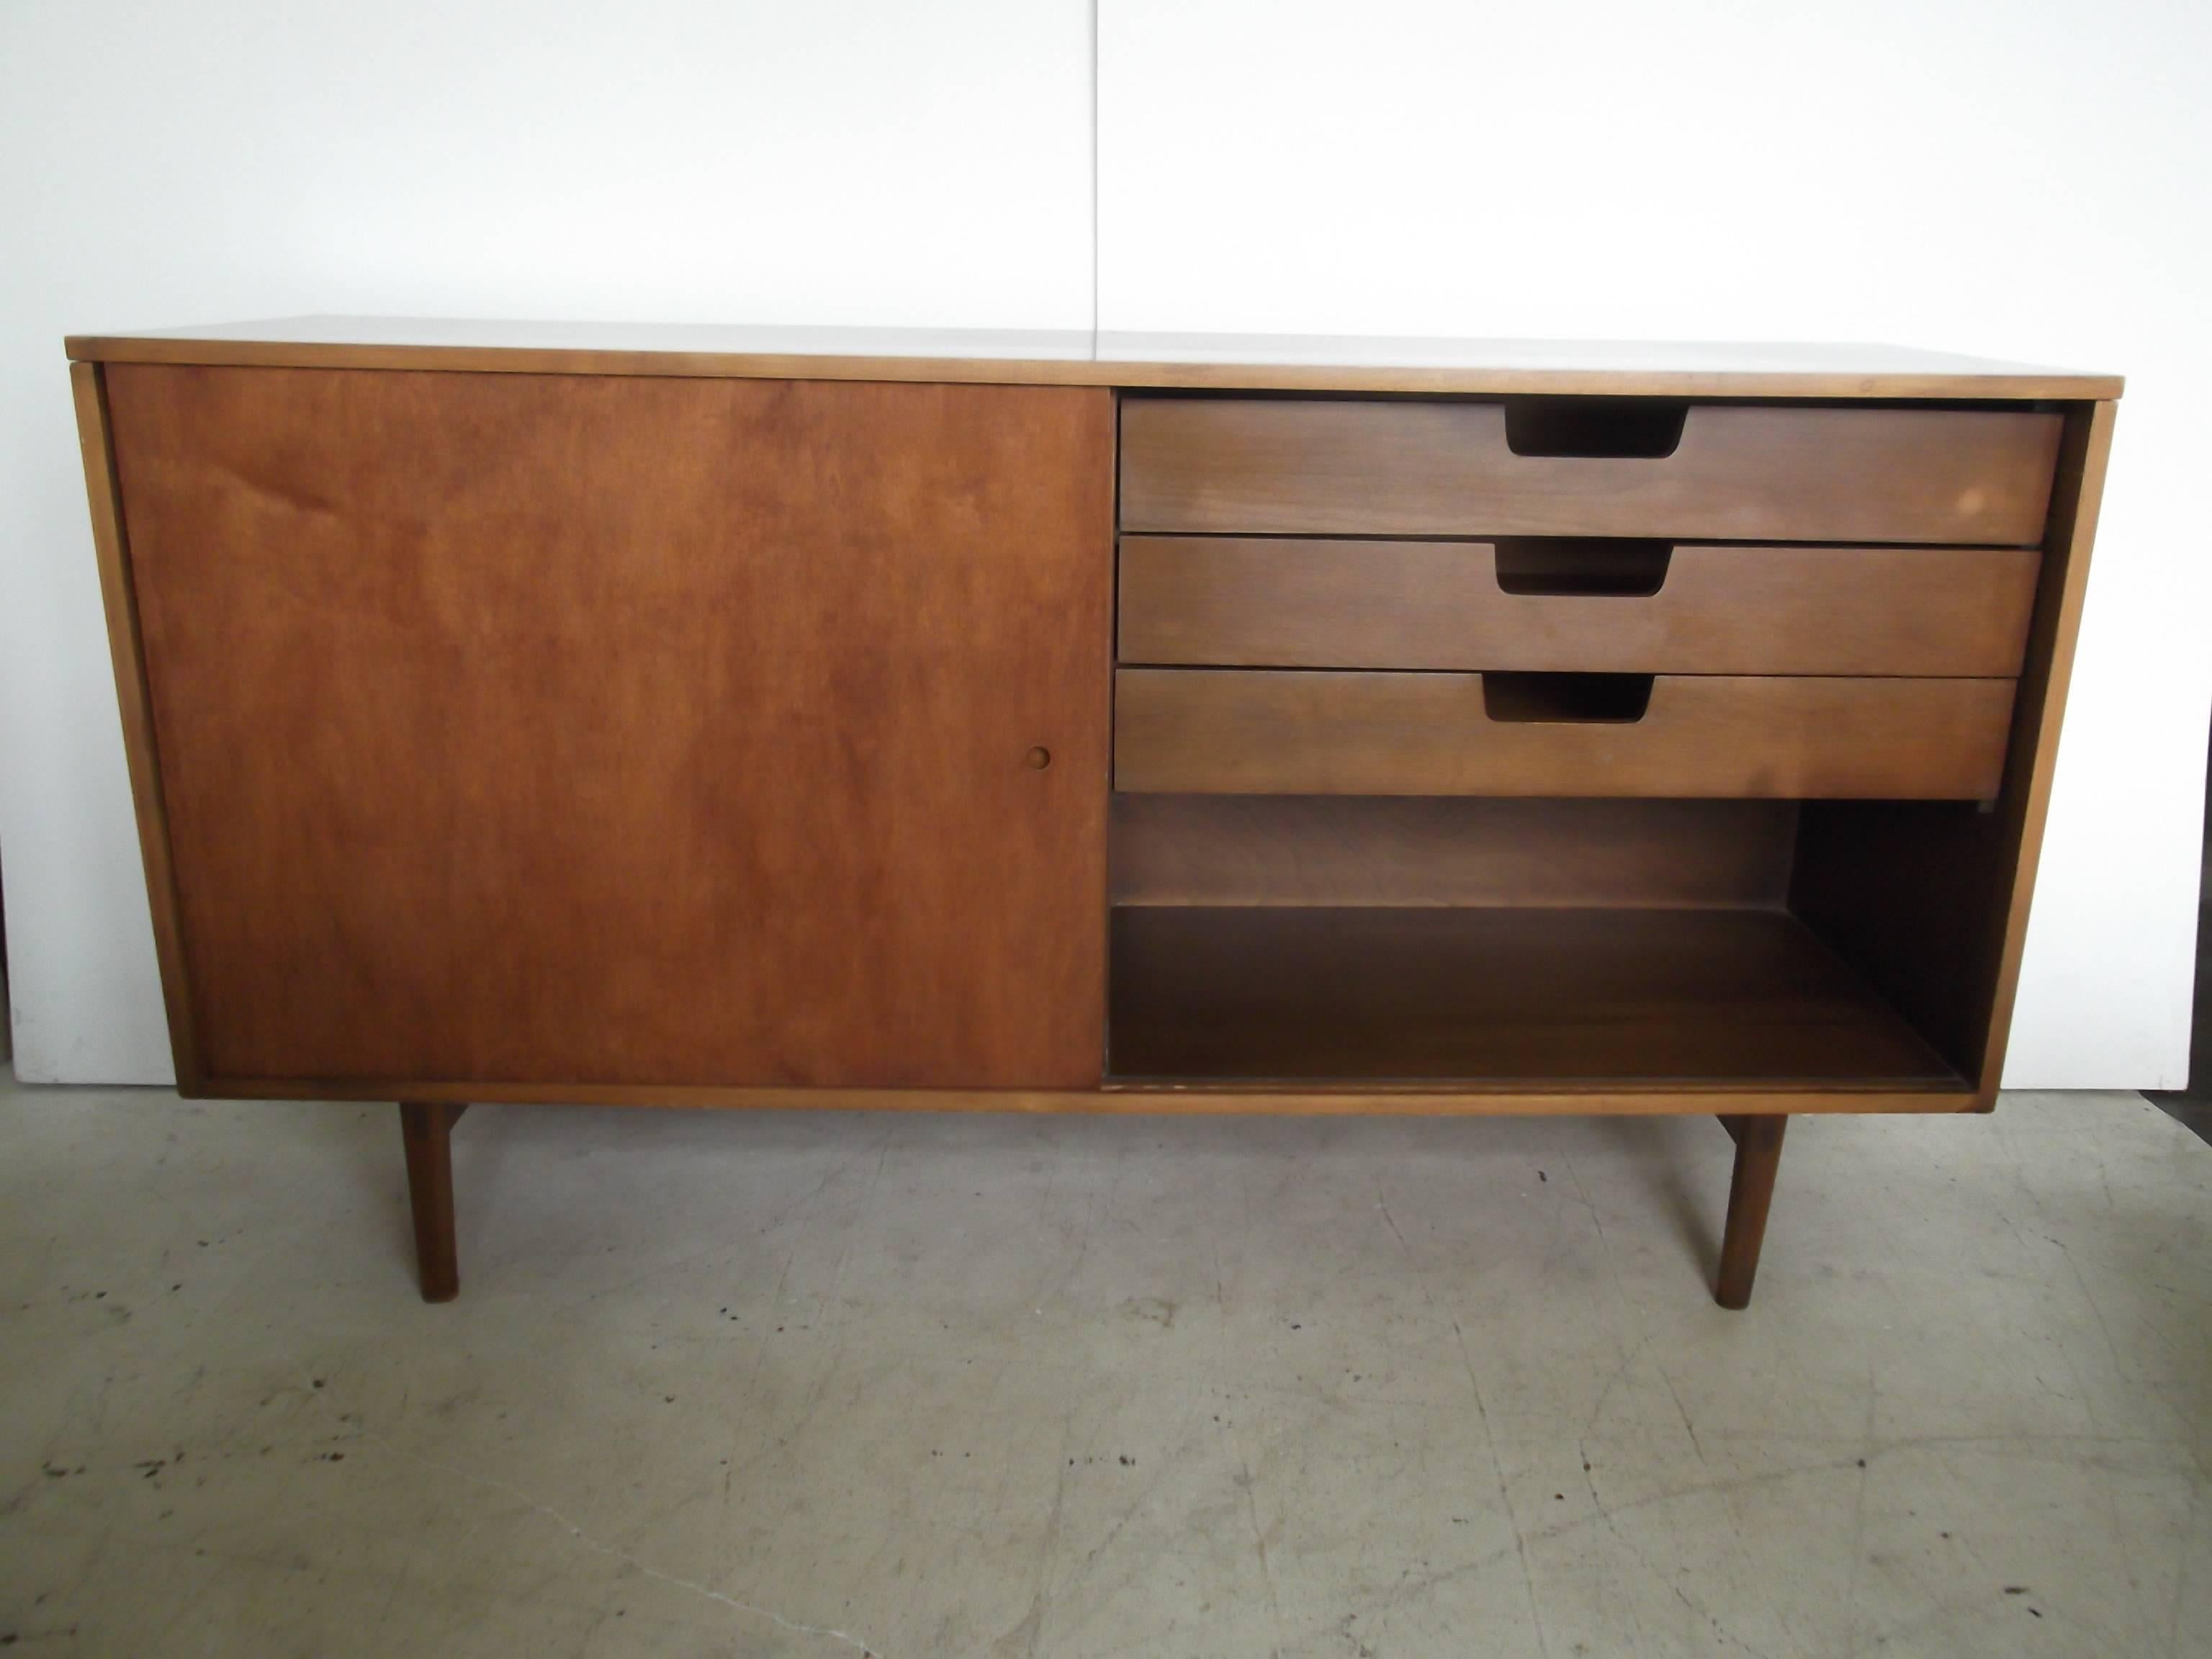 American Paul McCobb Planner Group Credenza Sideboard with Walnut Finish